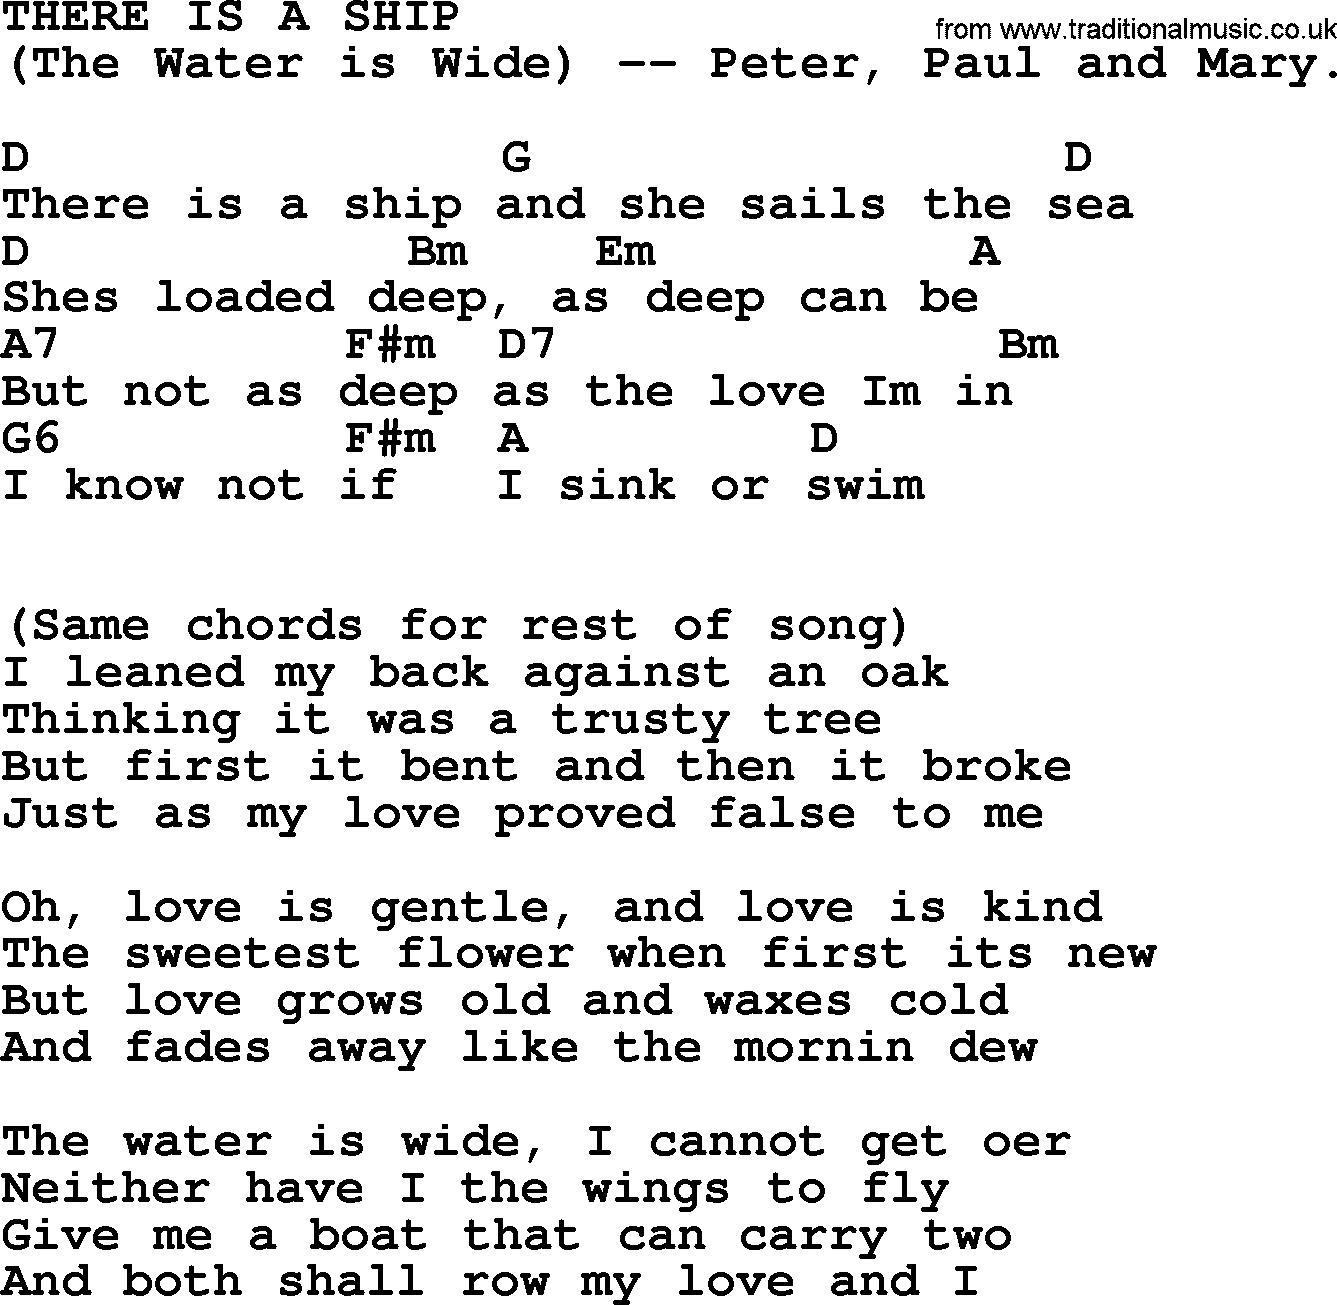 Peter, Paul and Mary song There Is A Ship The Water Is Wide, lyrics and chords